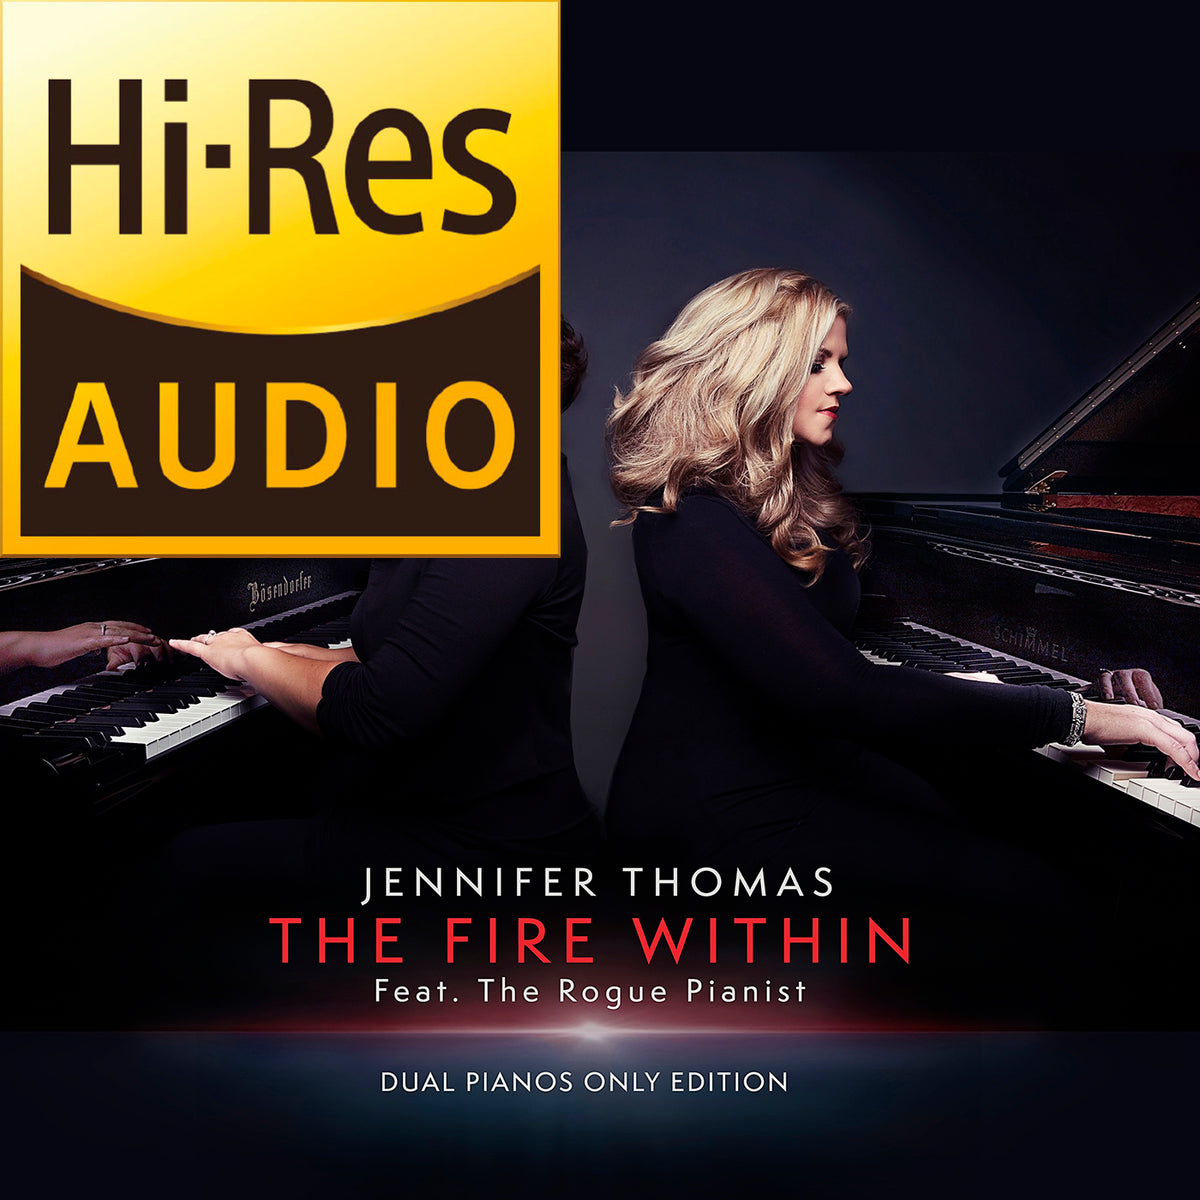 The Fire Within (Solo Version) High Res 24/96 High-Res Digital Download